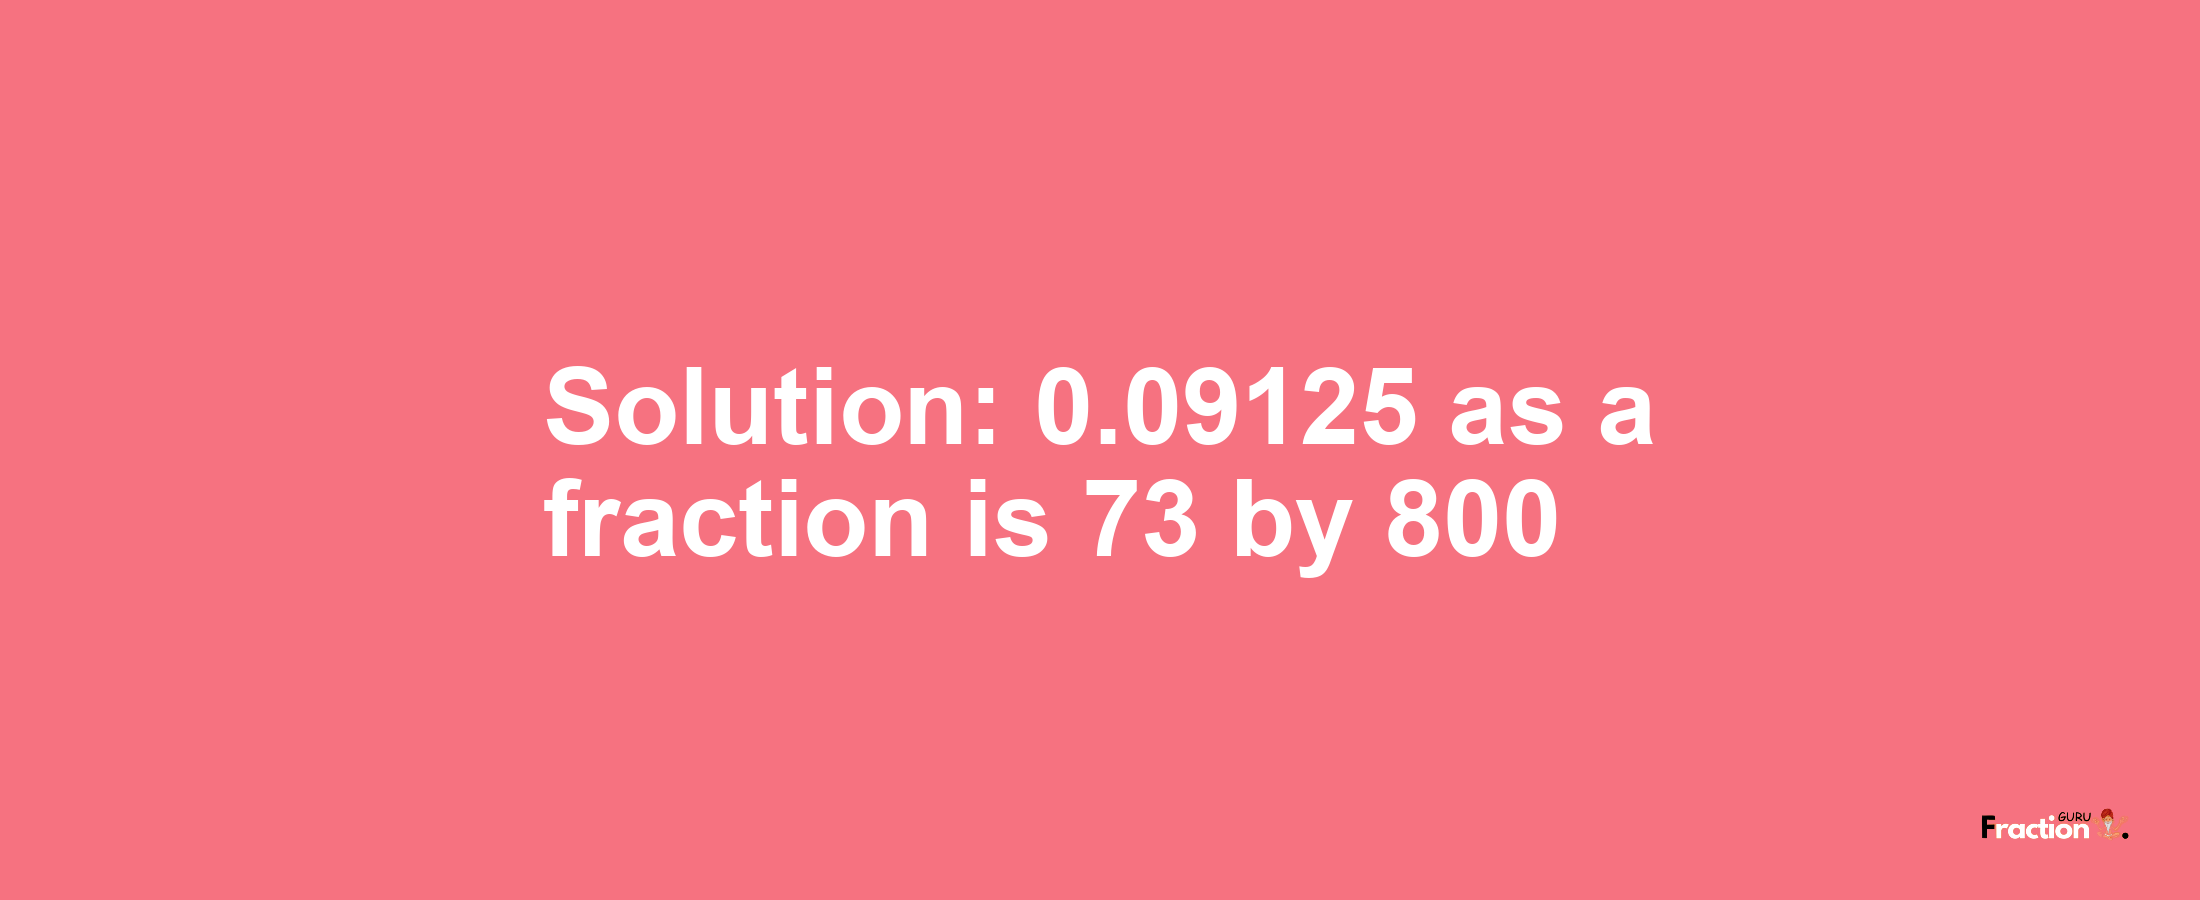 Solution:0.09125 as a fraction is 73/800